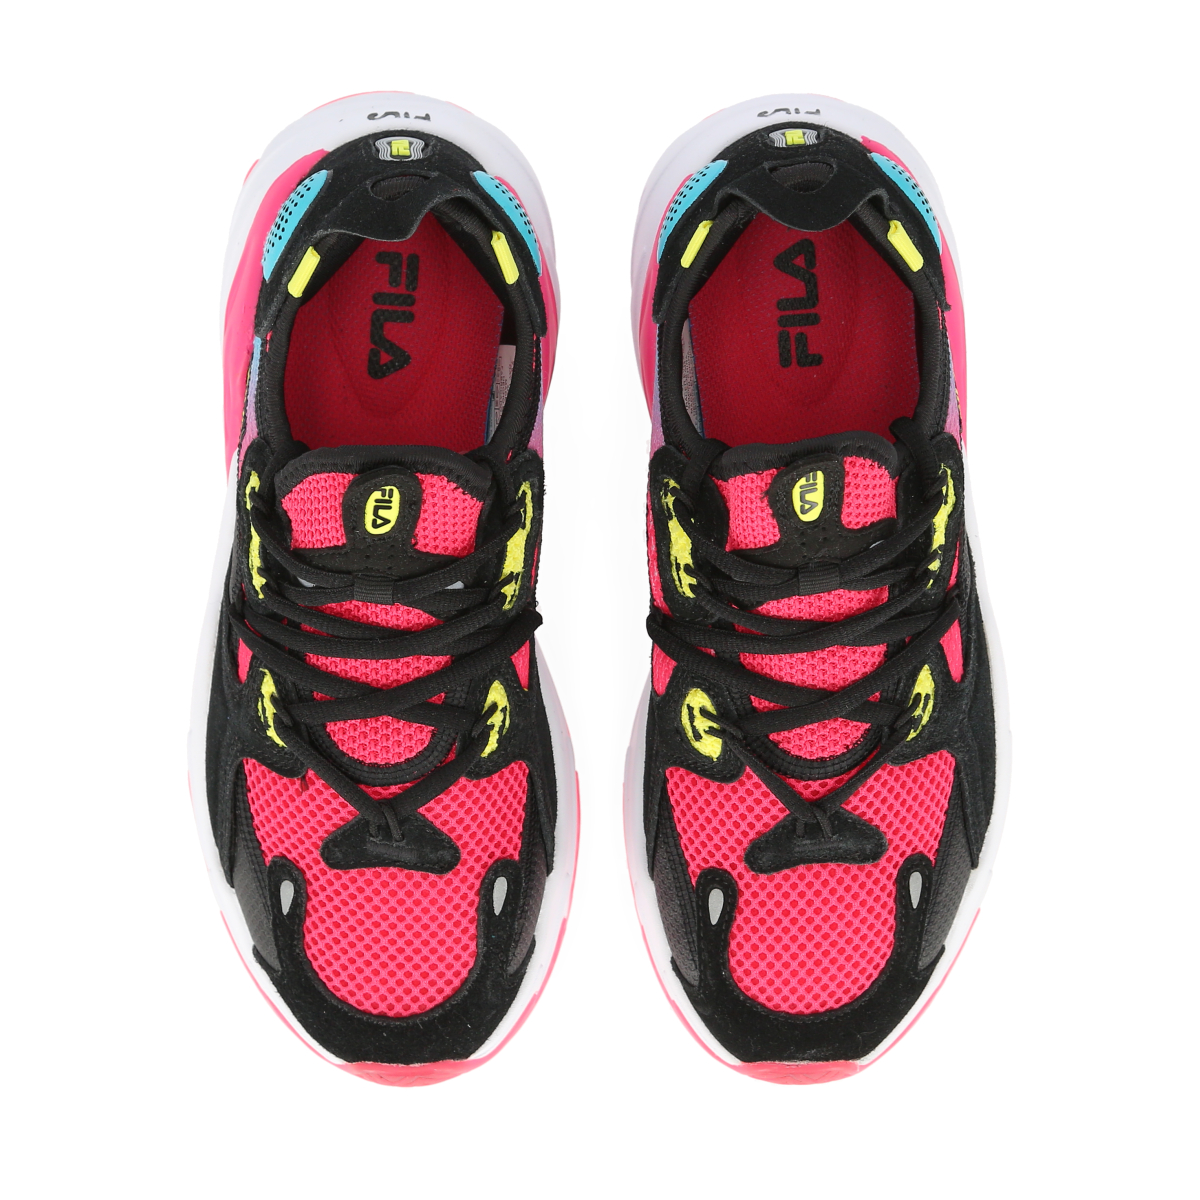 Zapatillas Fila Ray Tracer Evo 2 Ice Mujer,  image number null